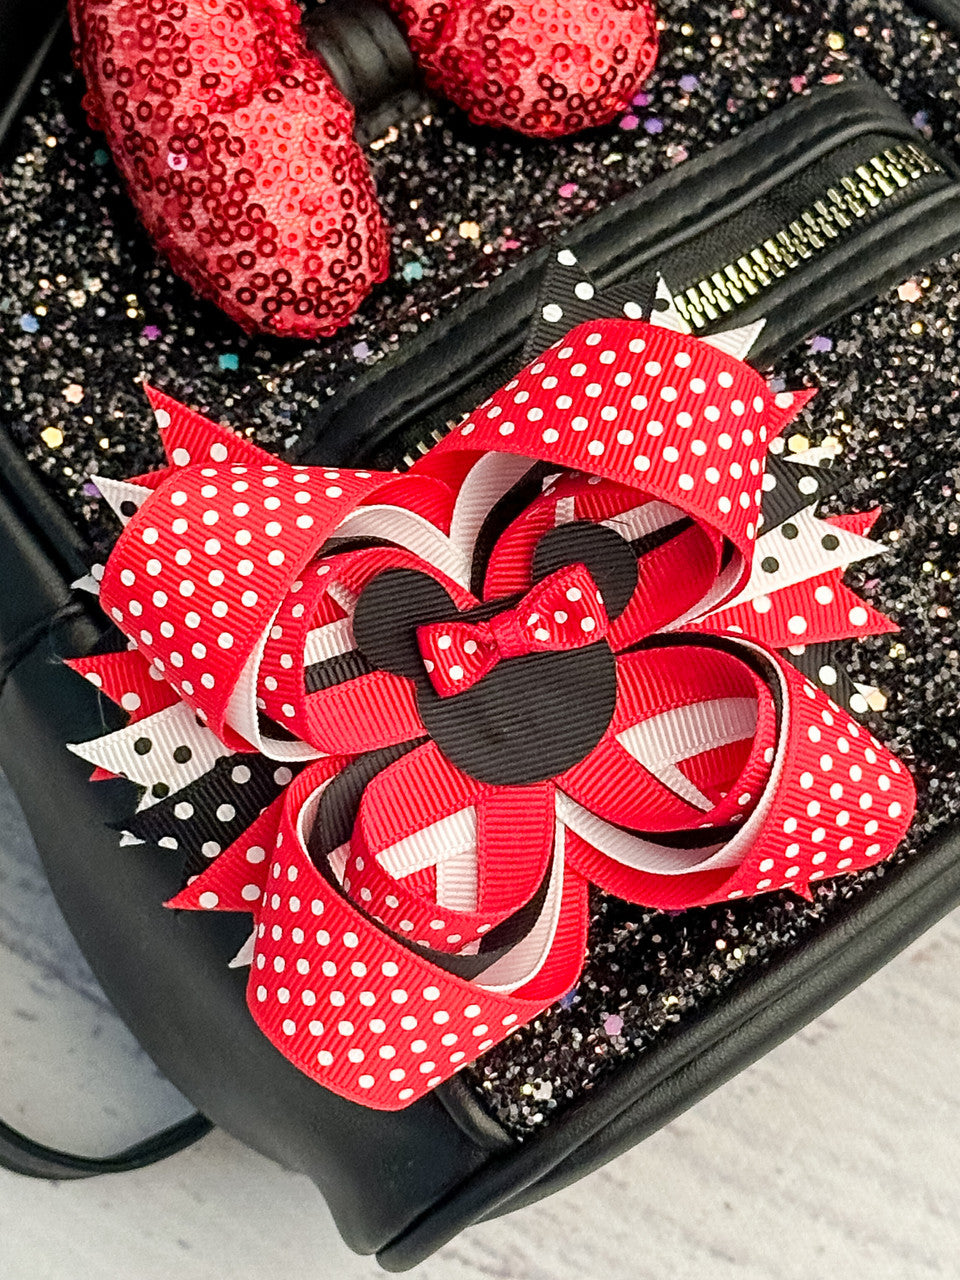 Polka dot Minnie Mouse hair bow in red.